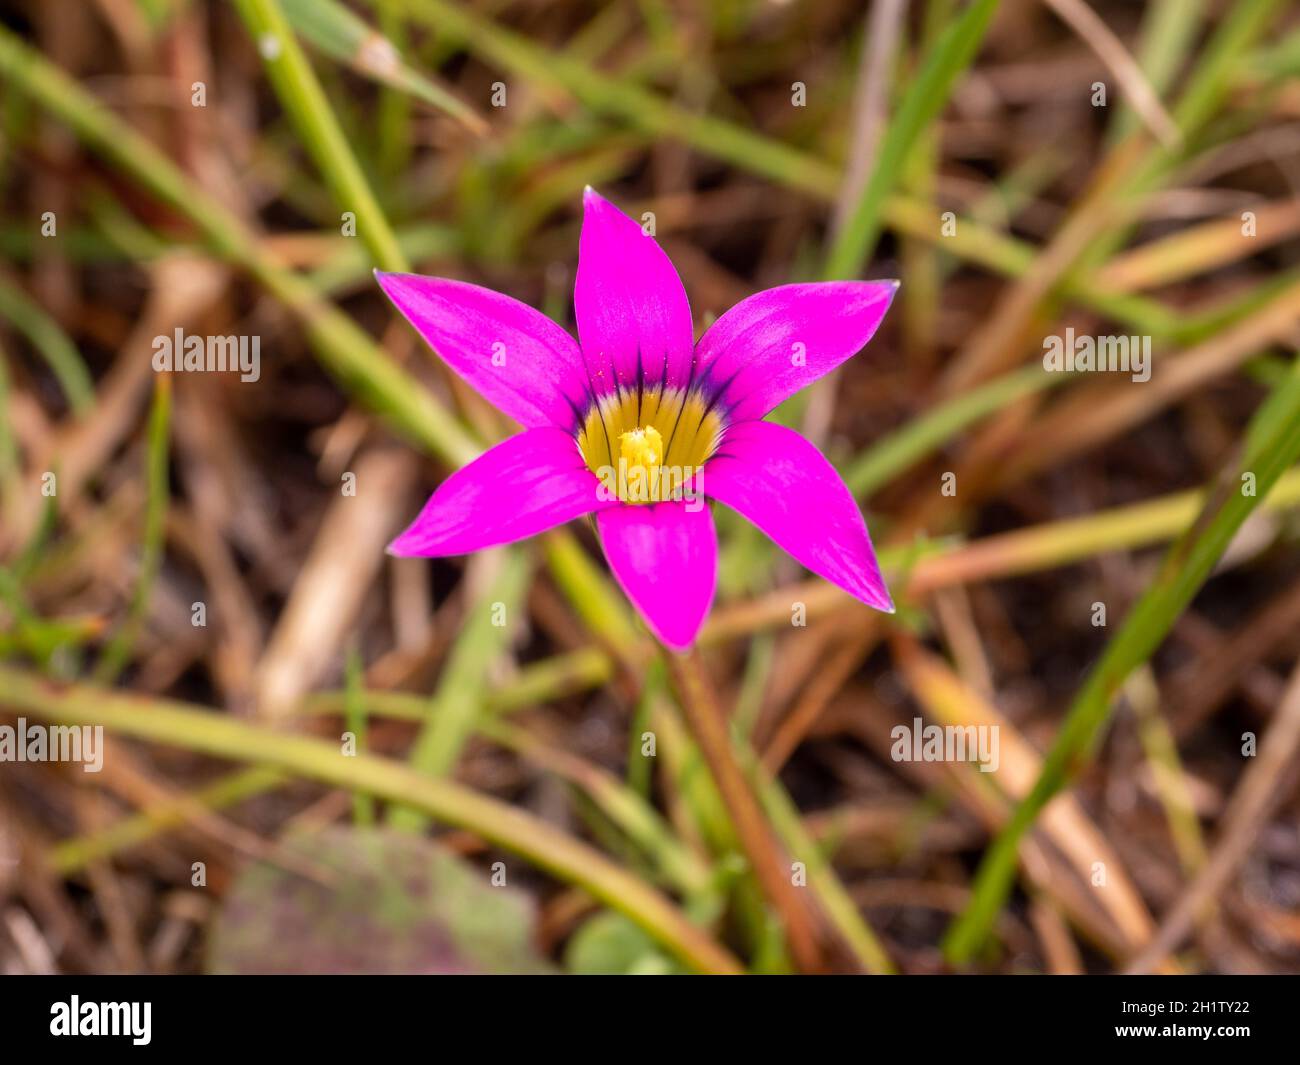 The bright pink flower of Romulea rosea (Onion Grass) which is considered a weed in Australia where the plant was photographed. Stock Photo